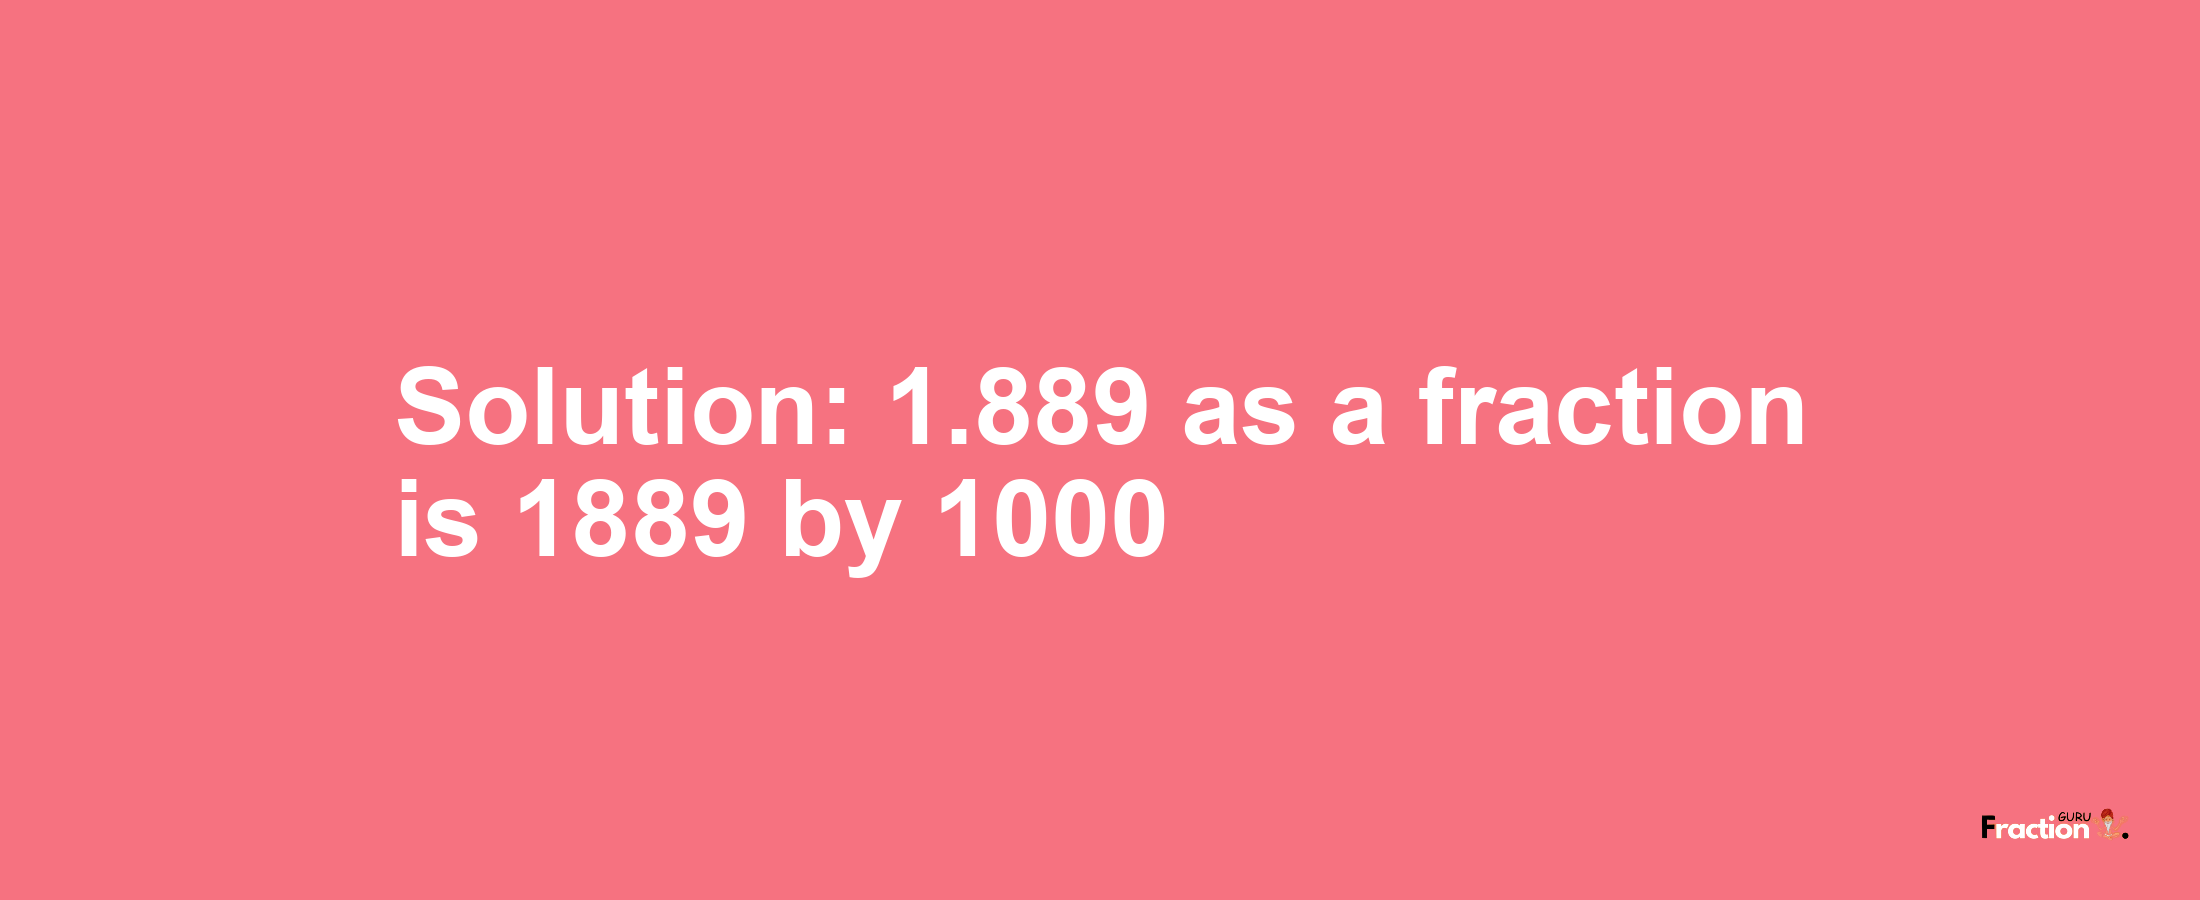 Solution:1.889 as a fraction is 1889/1000